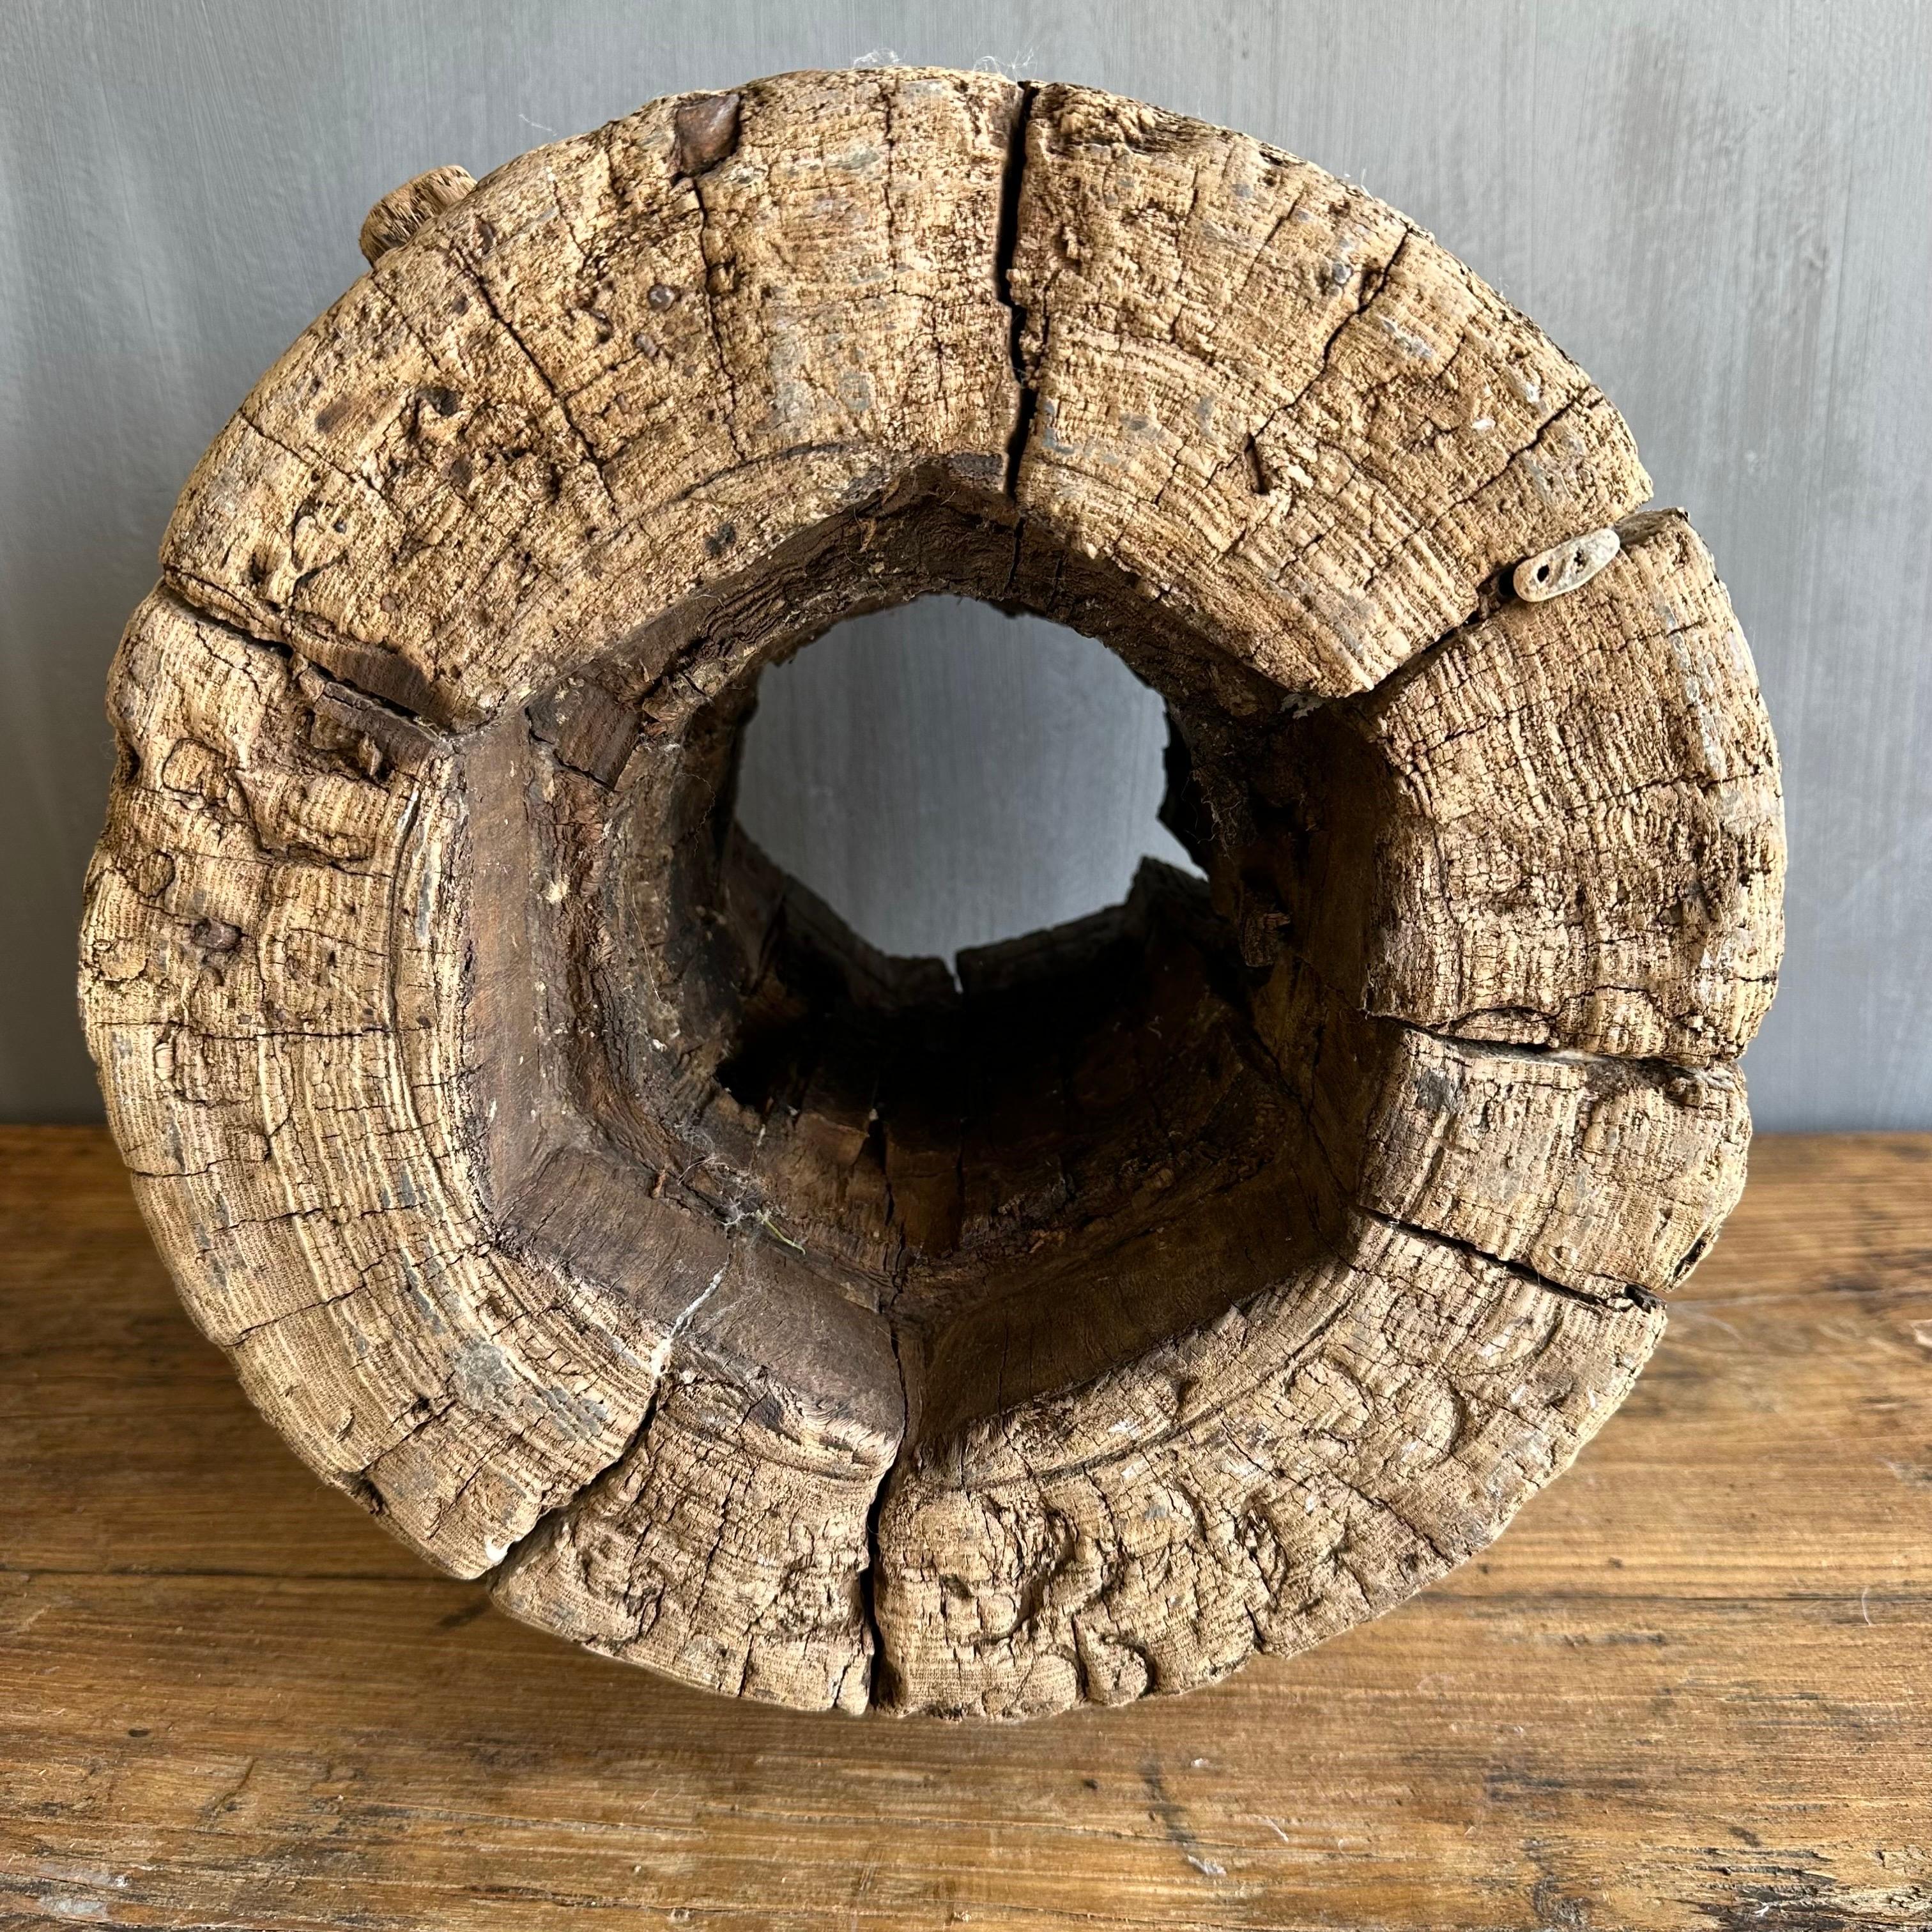 Vintage Elm wood wheel 
Great as an accent piece for a bookshelf or side table.
Size: 15”d x 11”h